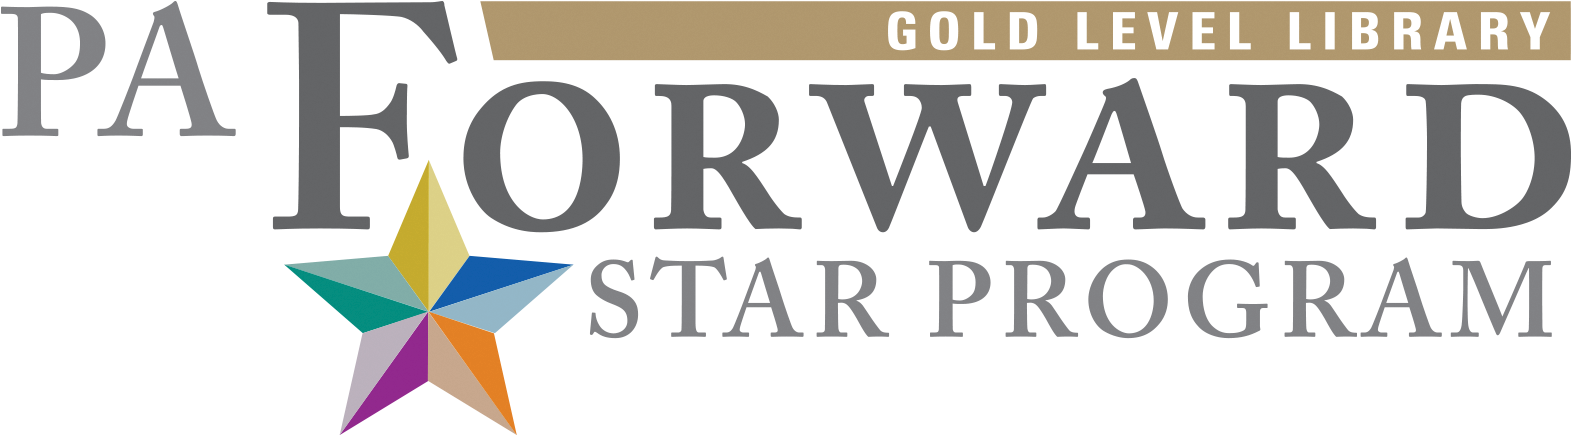 P A Forward Star Program Gold Level Library PNG